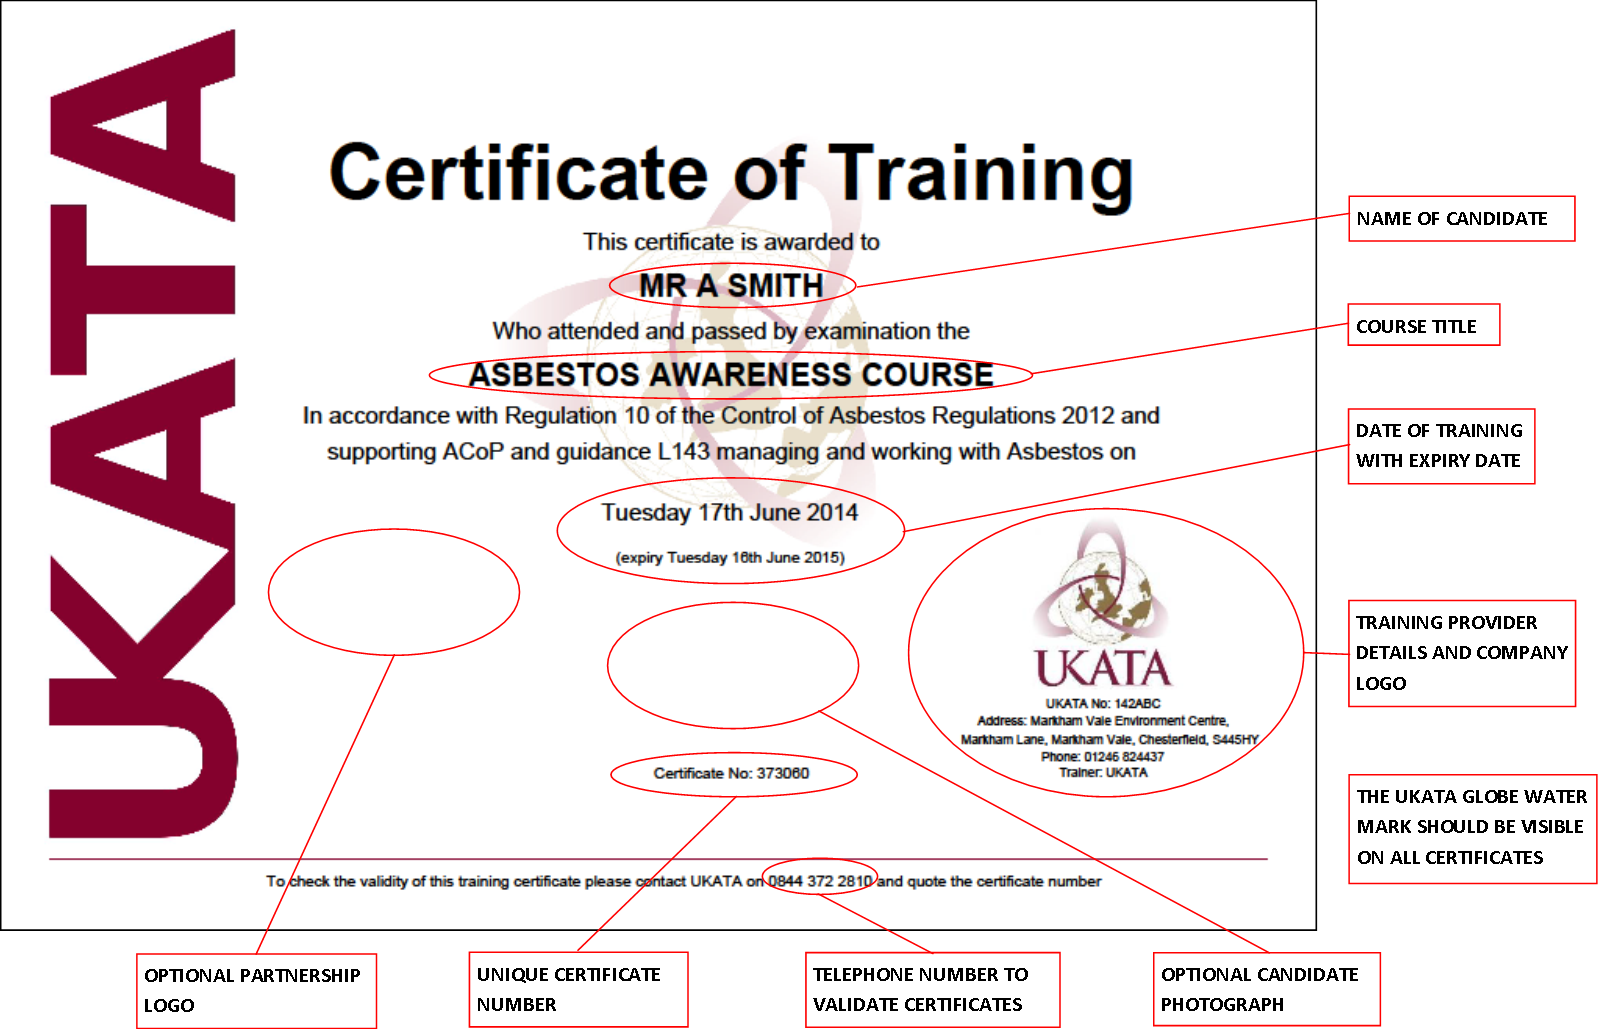 Does your certificae look like this